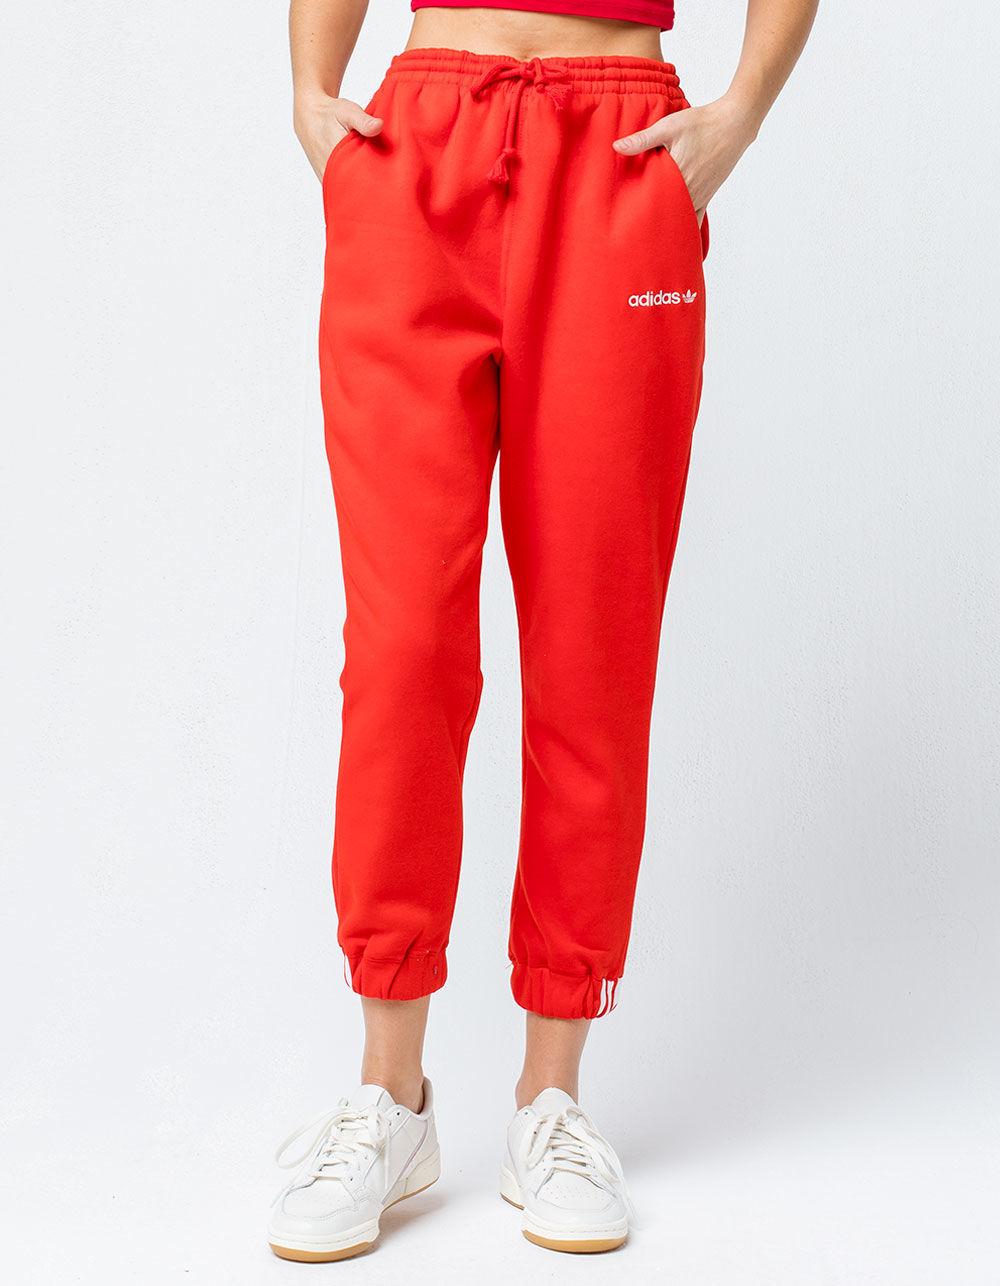 red adidas pants for women